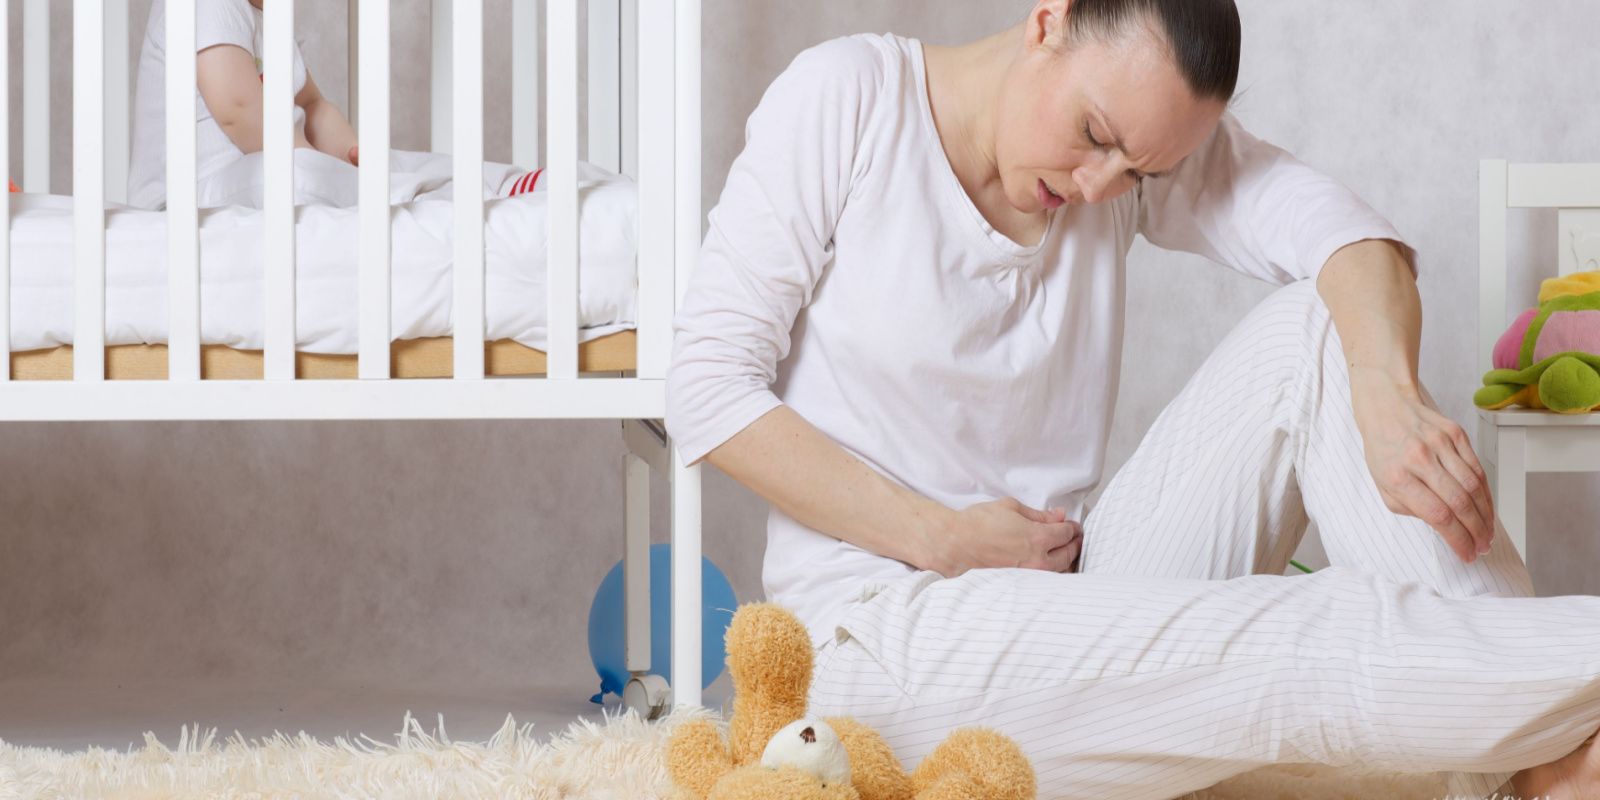 A woman is experiencing postpartum pain and stress while sitting beside a baby bed